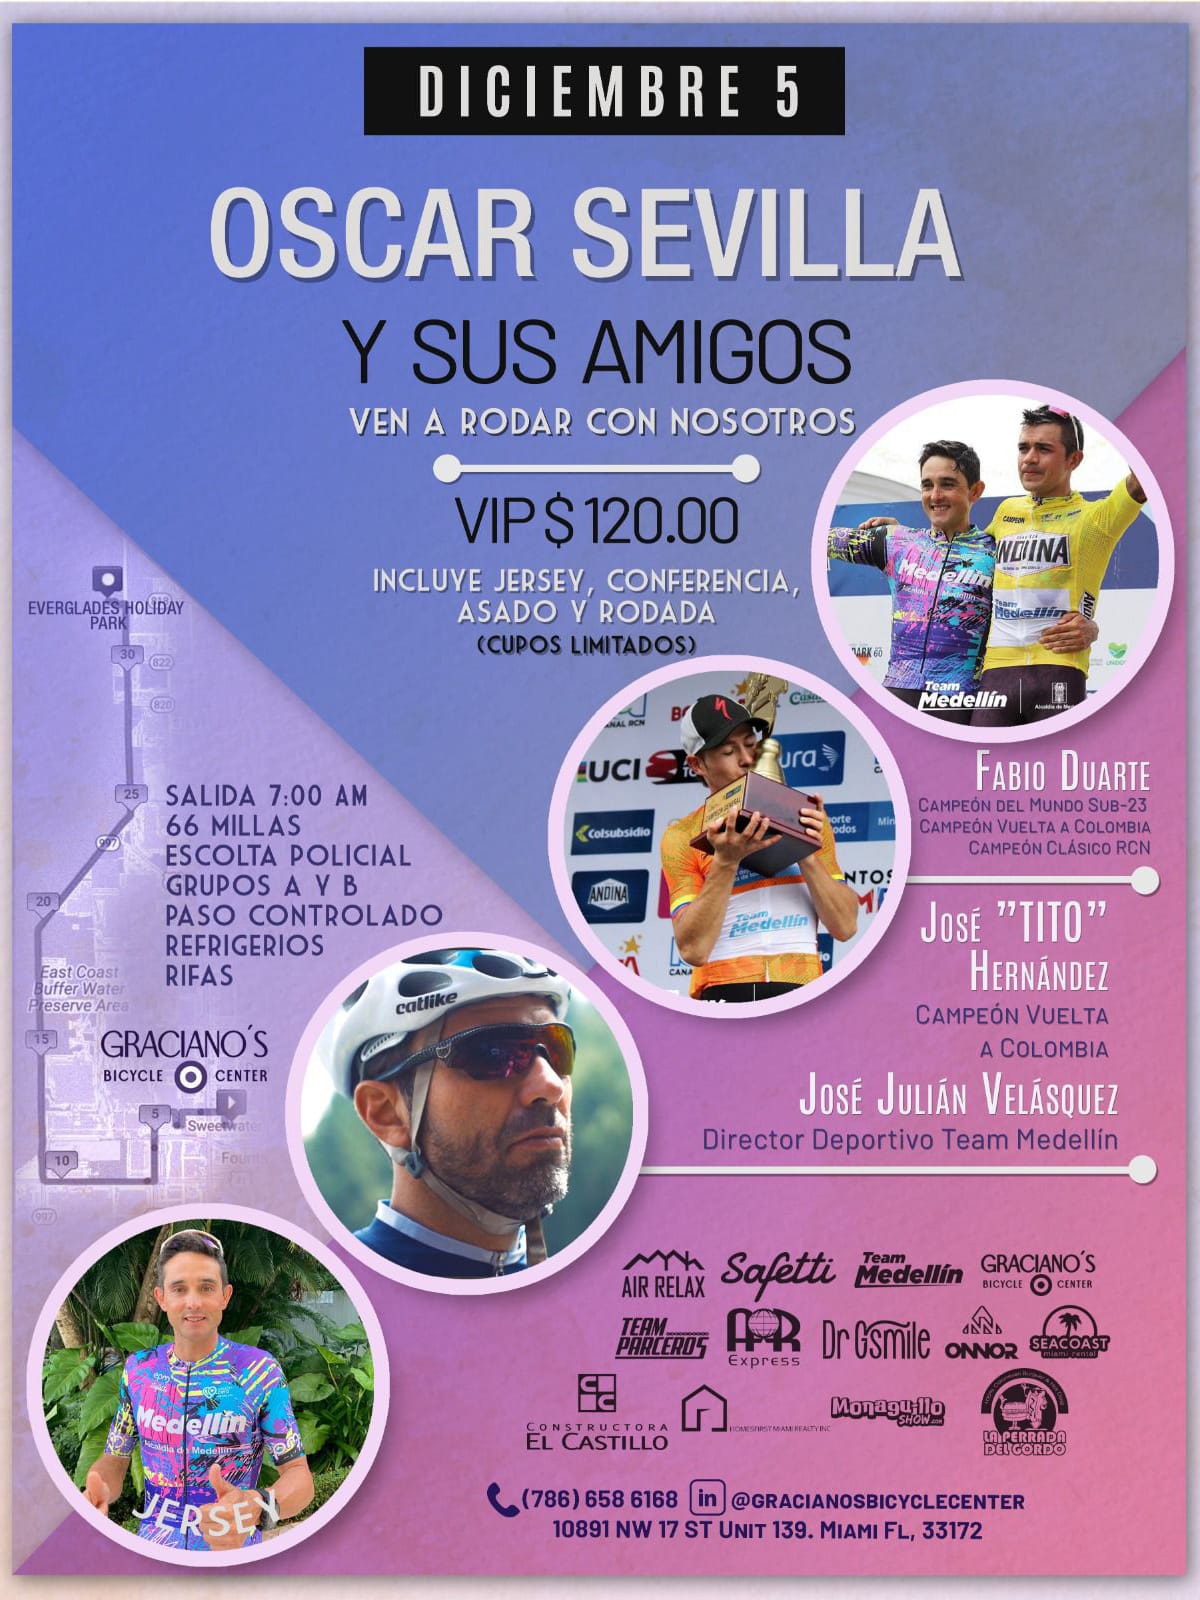 OSCAR SEVILLA AND HIS FRIENDS 2021, cycling events, cycling competition